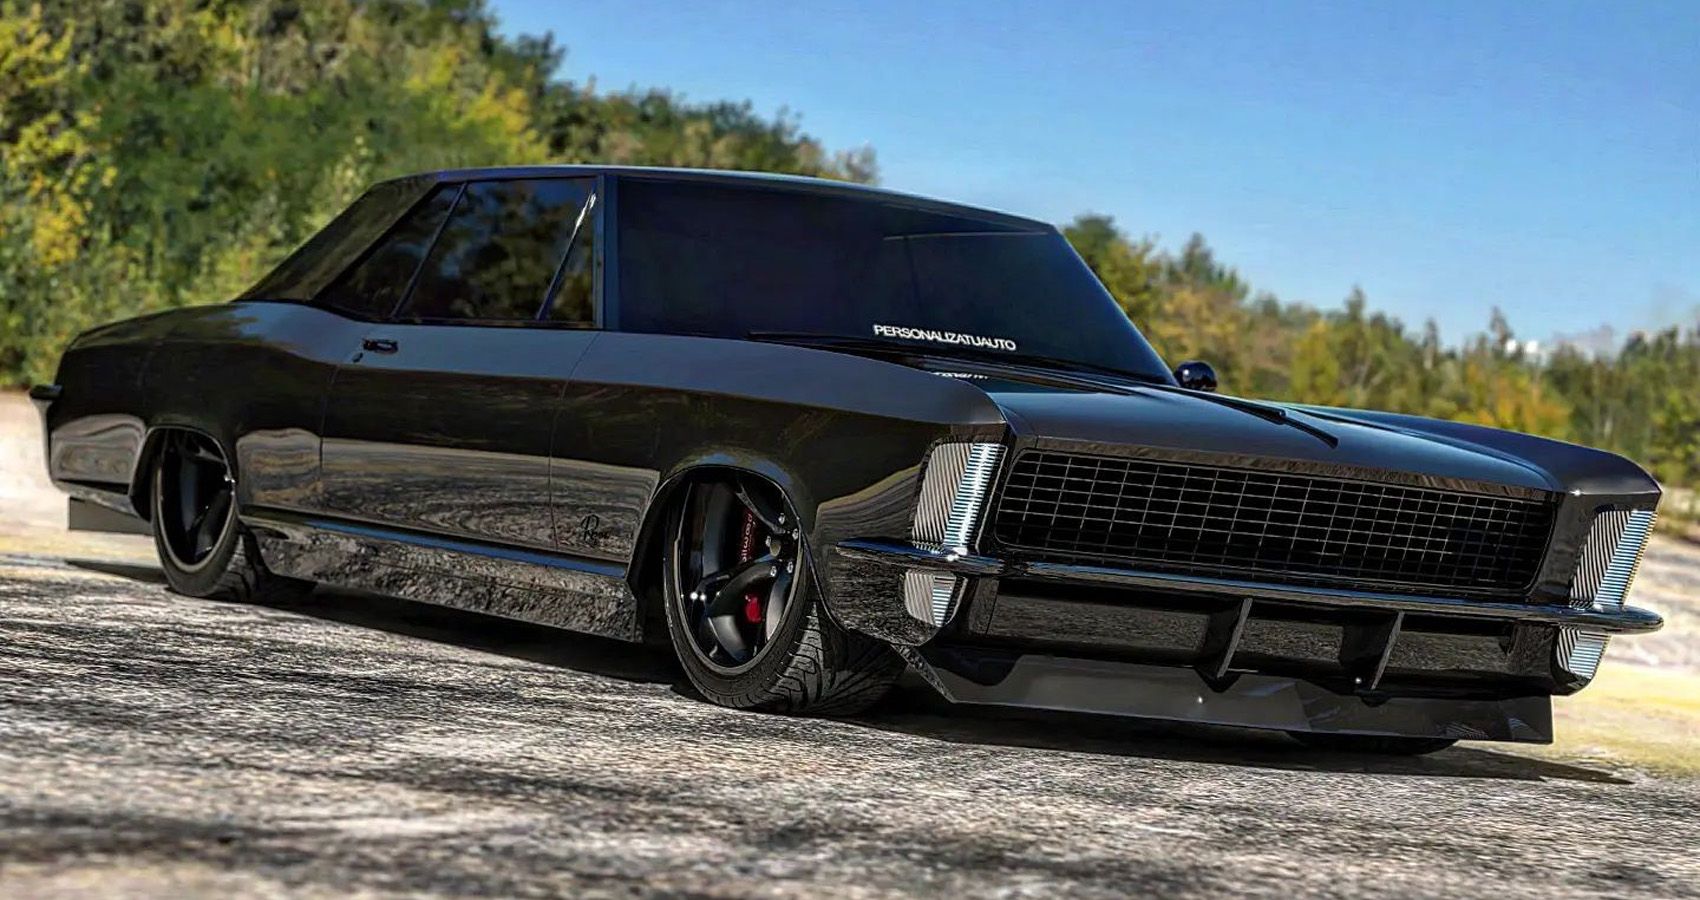 This Slammed And Murdered Out 1965 Buick Riviera Is A Stunning Neo Classic